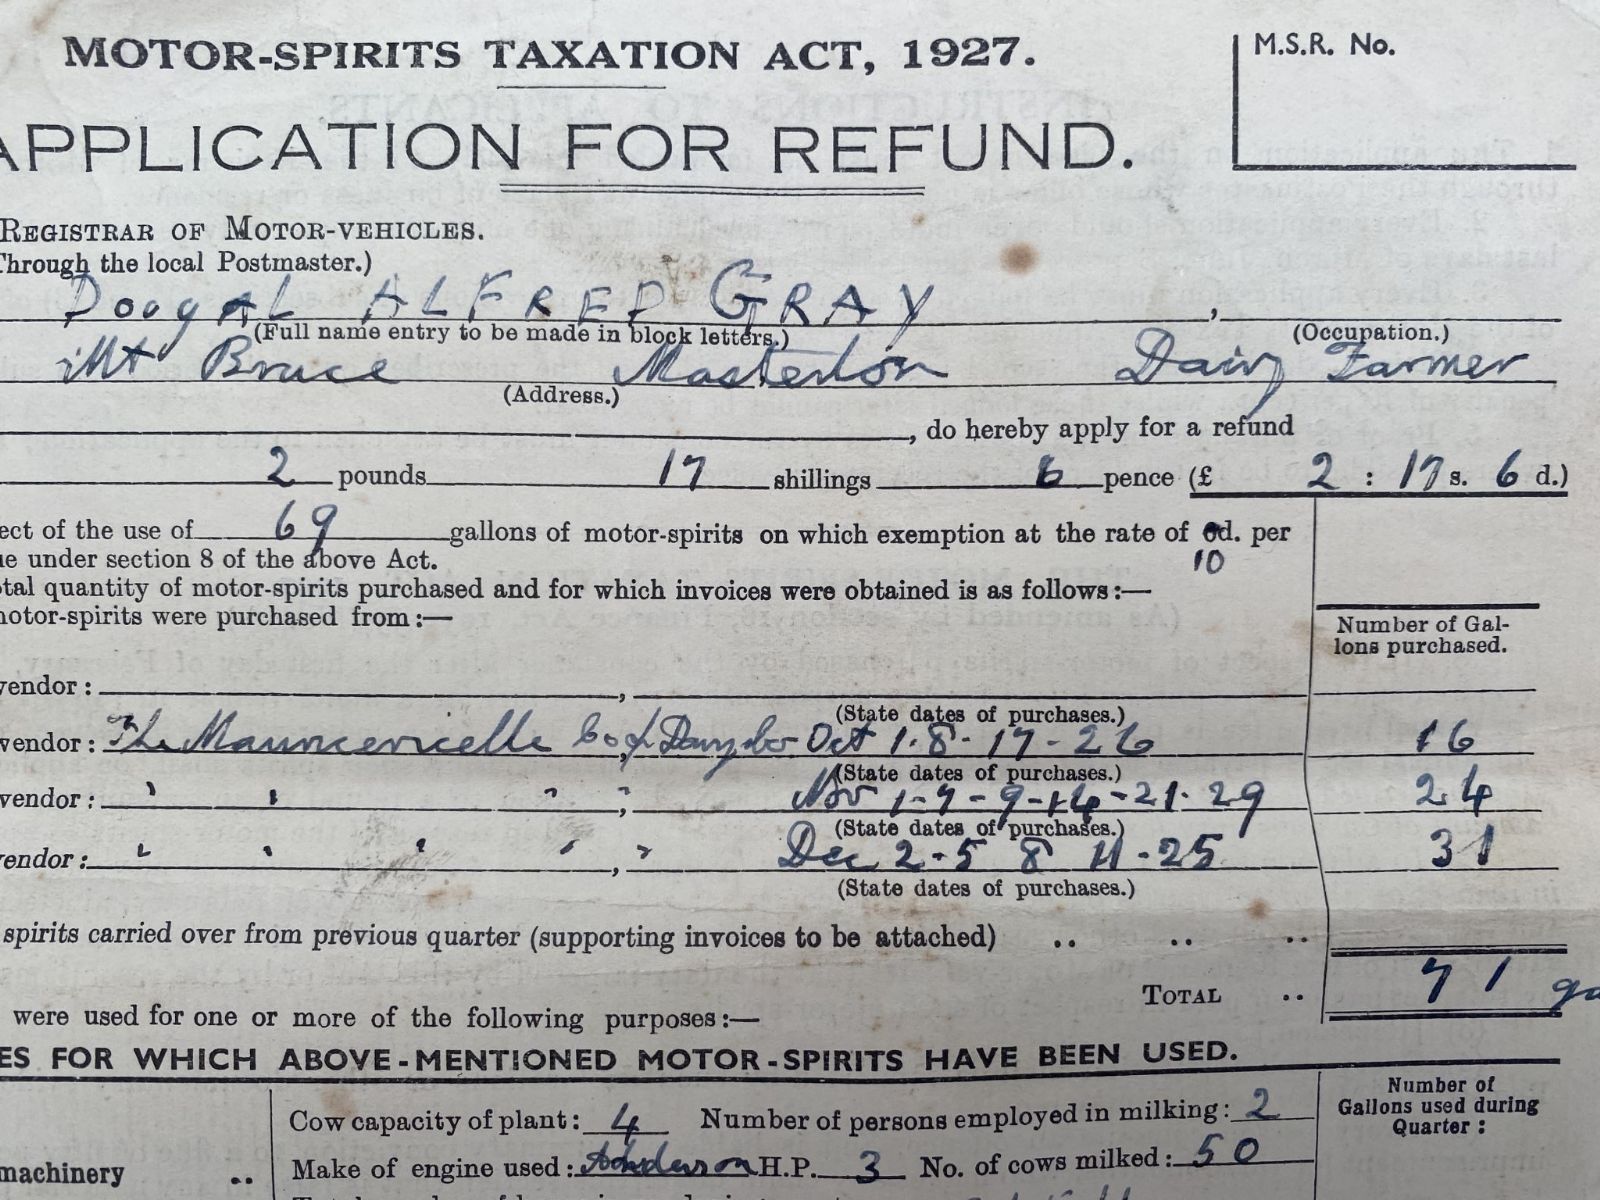 OLD DOCUMENT: Motor Spirits Taxation - Application for refund 1931